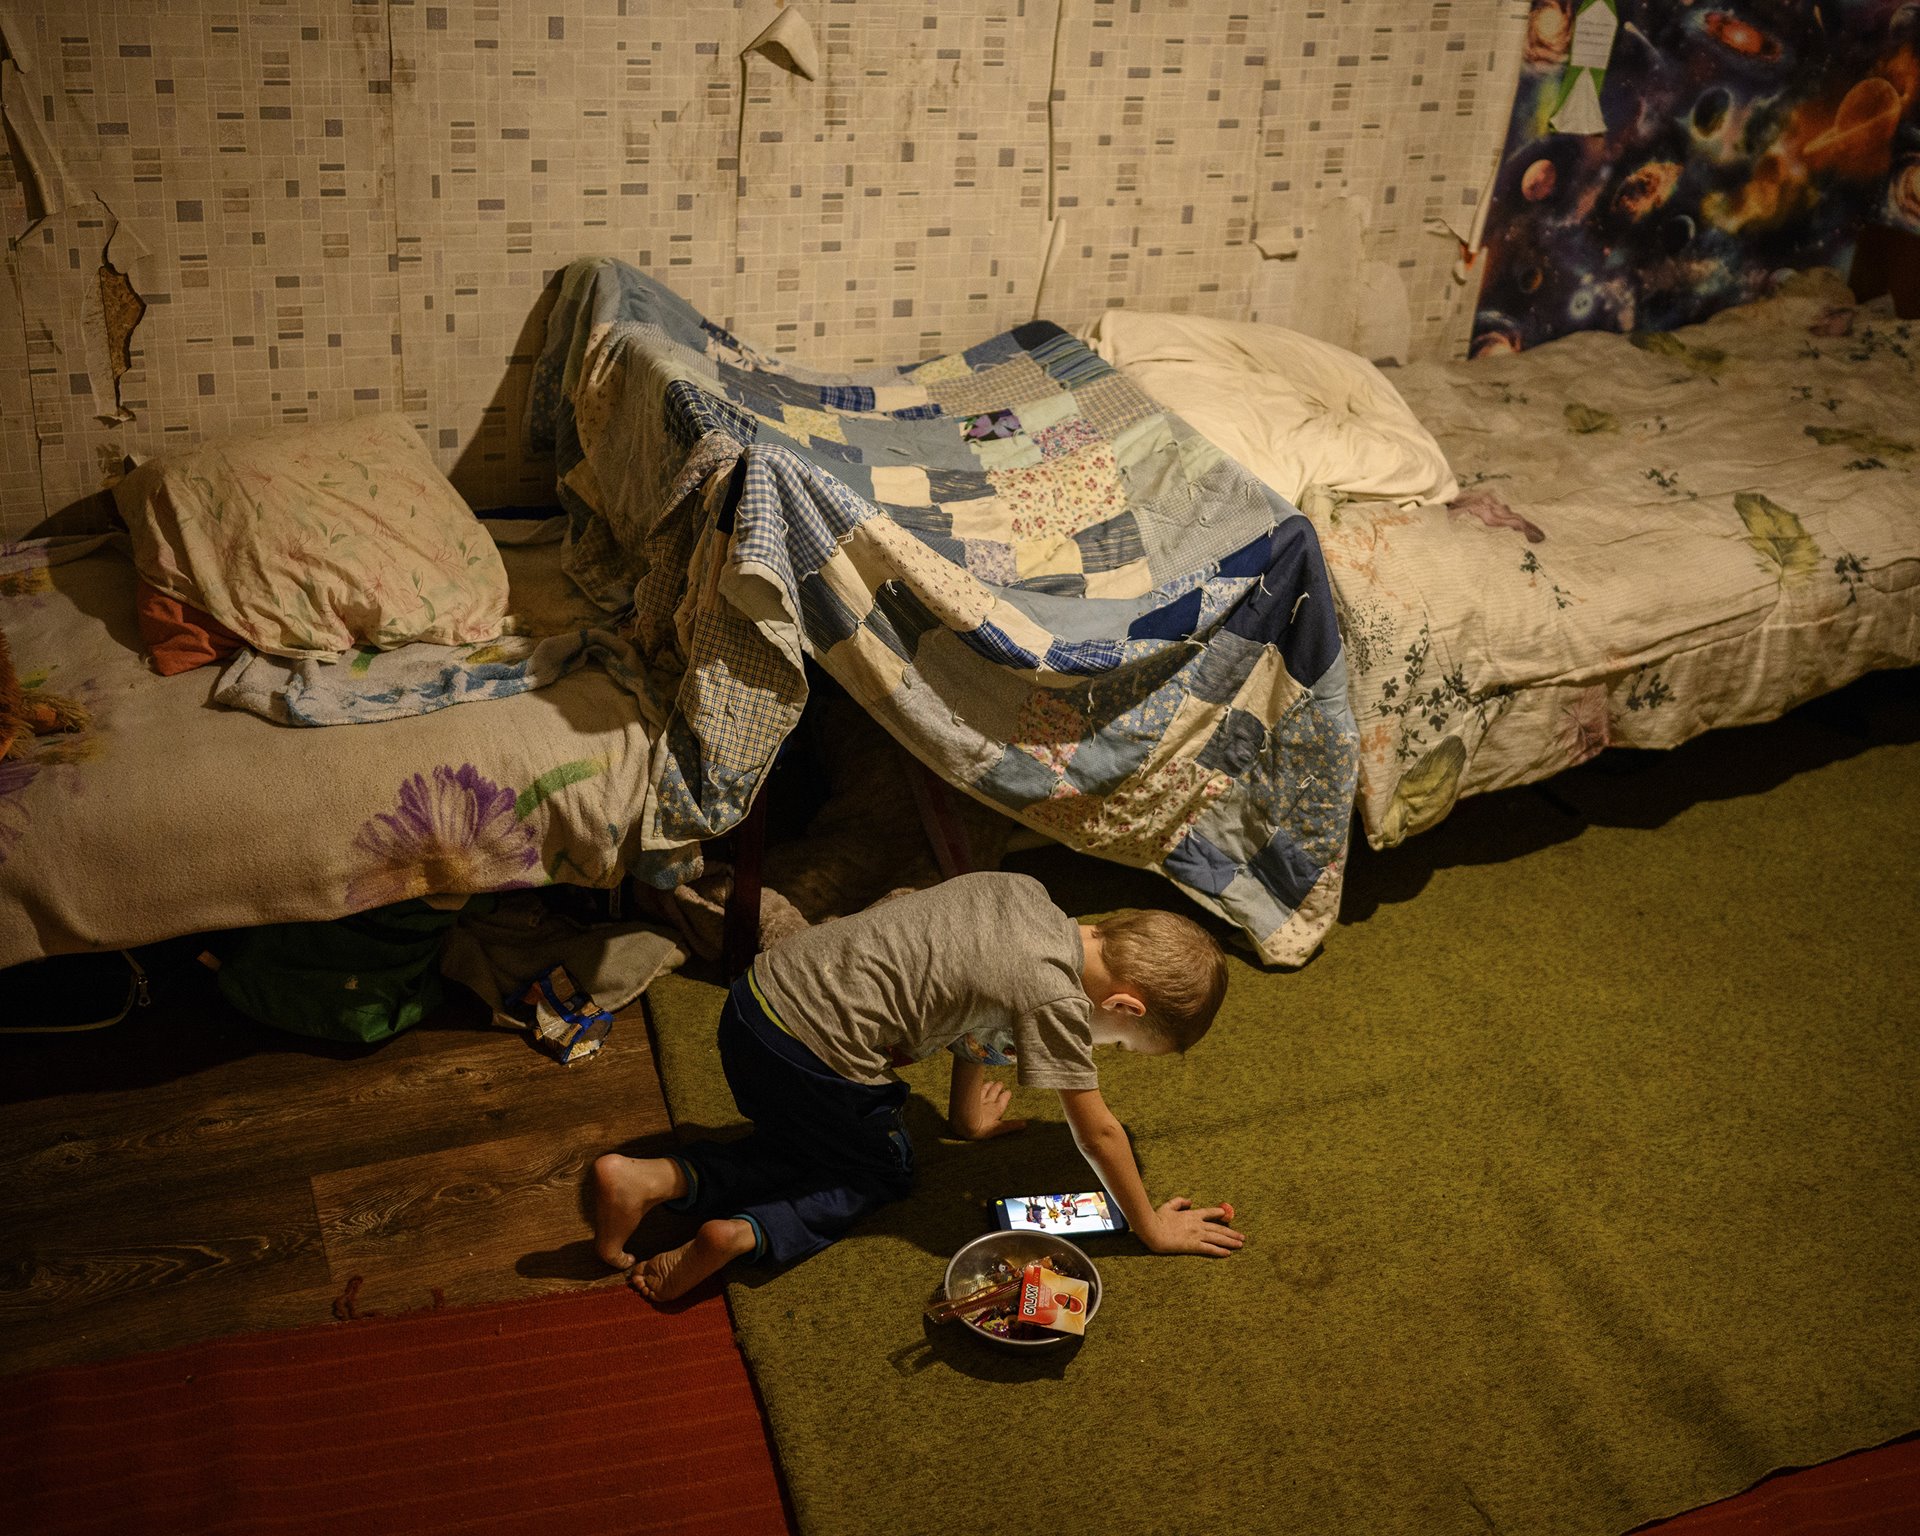 A boy plays a video game on a cell phone in his mother&rsquo;s bedroom in Zaitseve, Donbas, Ukraine, a few hundred meters from the &nbsp;front line of the conflict between Ukrainian and separatist forces. The village of Zaitseve is split in two &ndash; one part is controlled by separatists, the other by government forces.